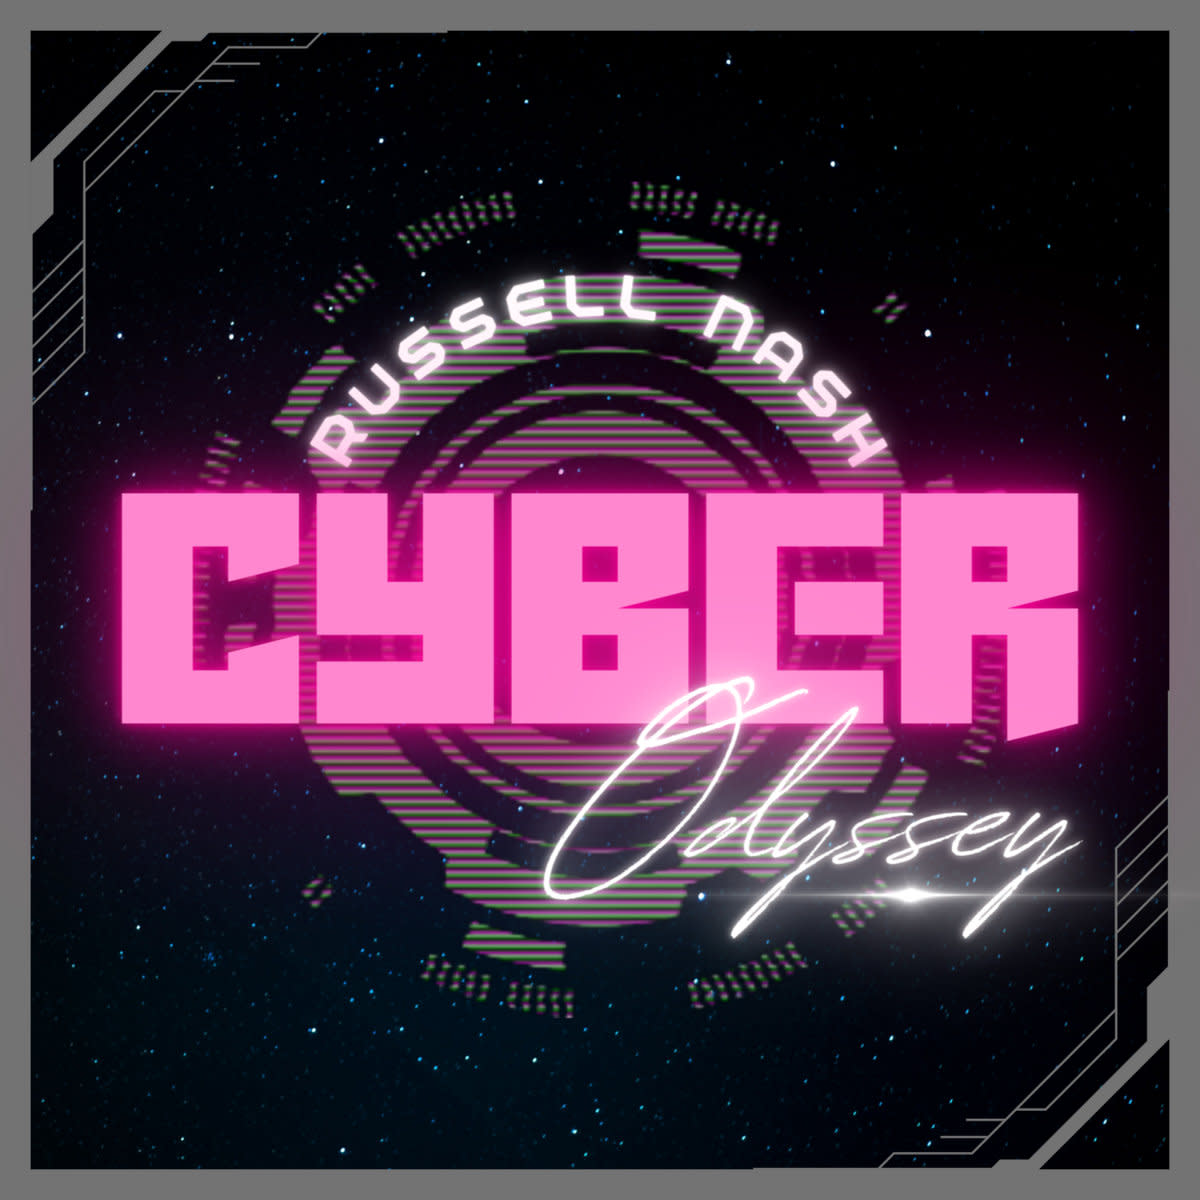 synth-ep-review-cyber-odyssey-by-russell-nash